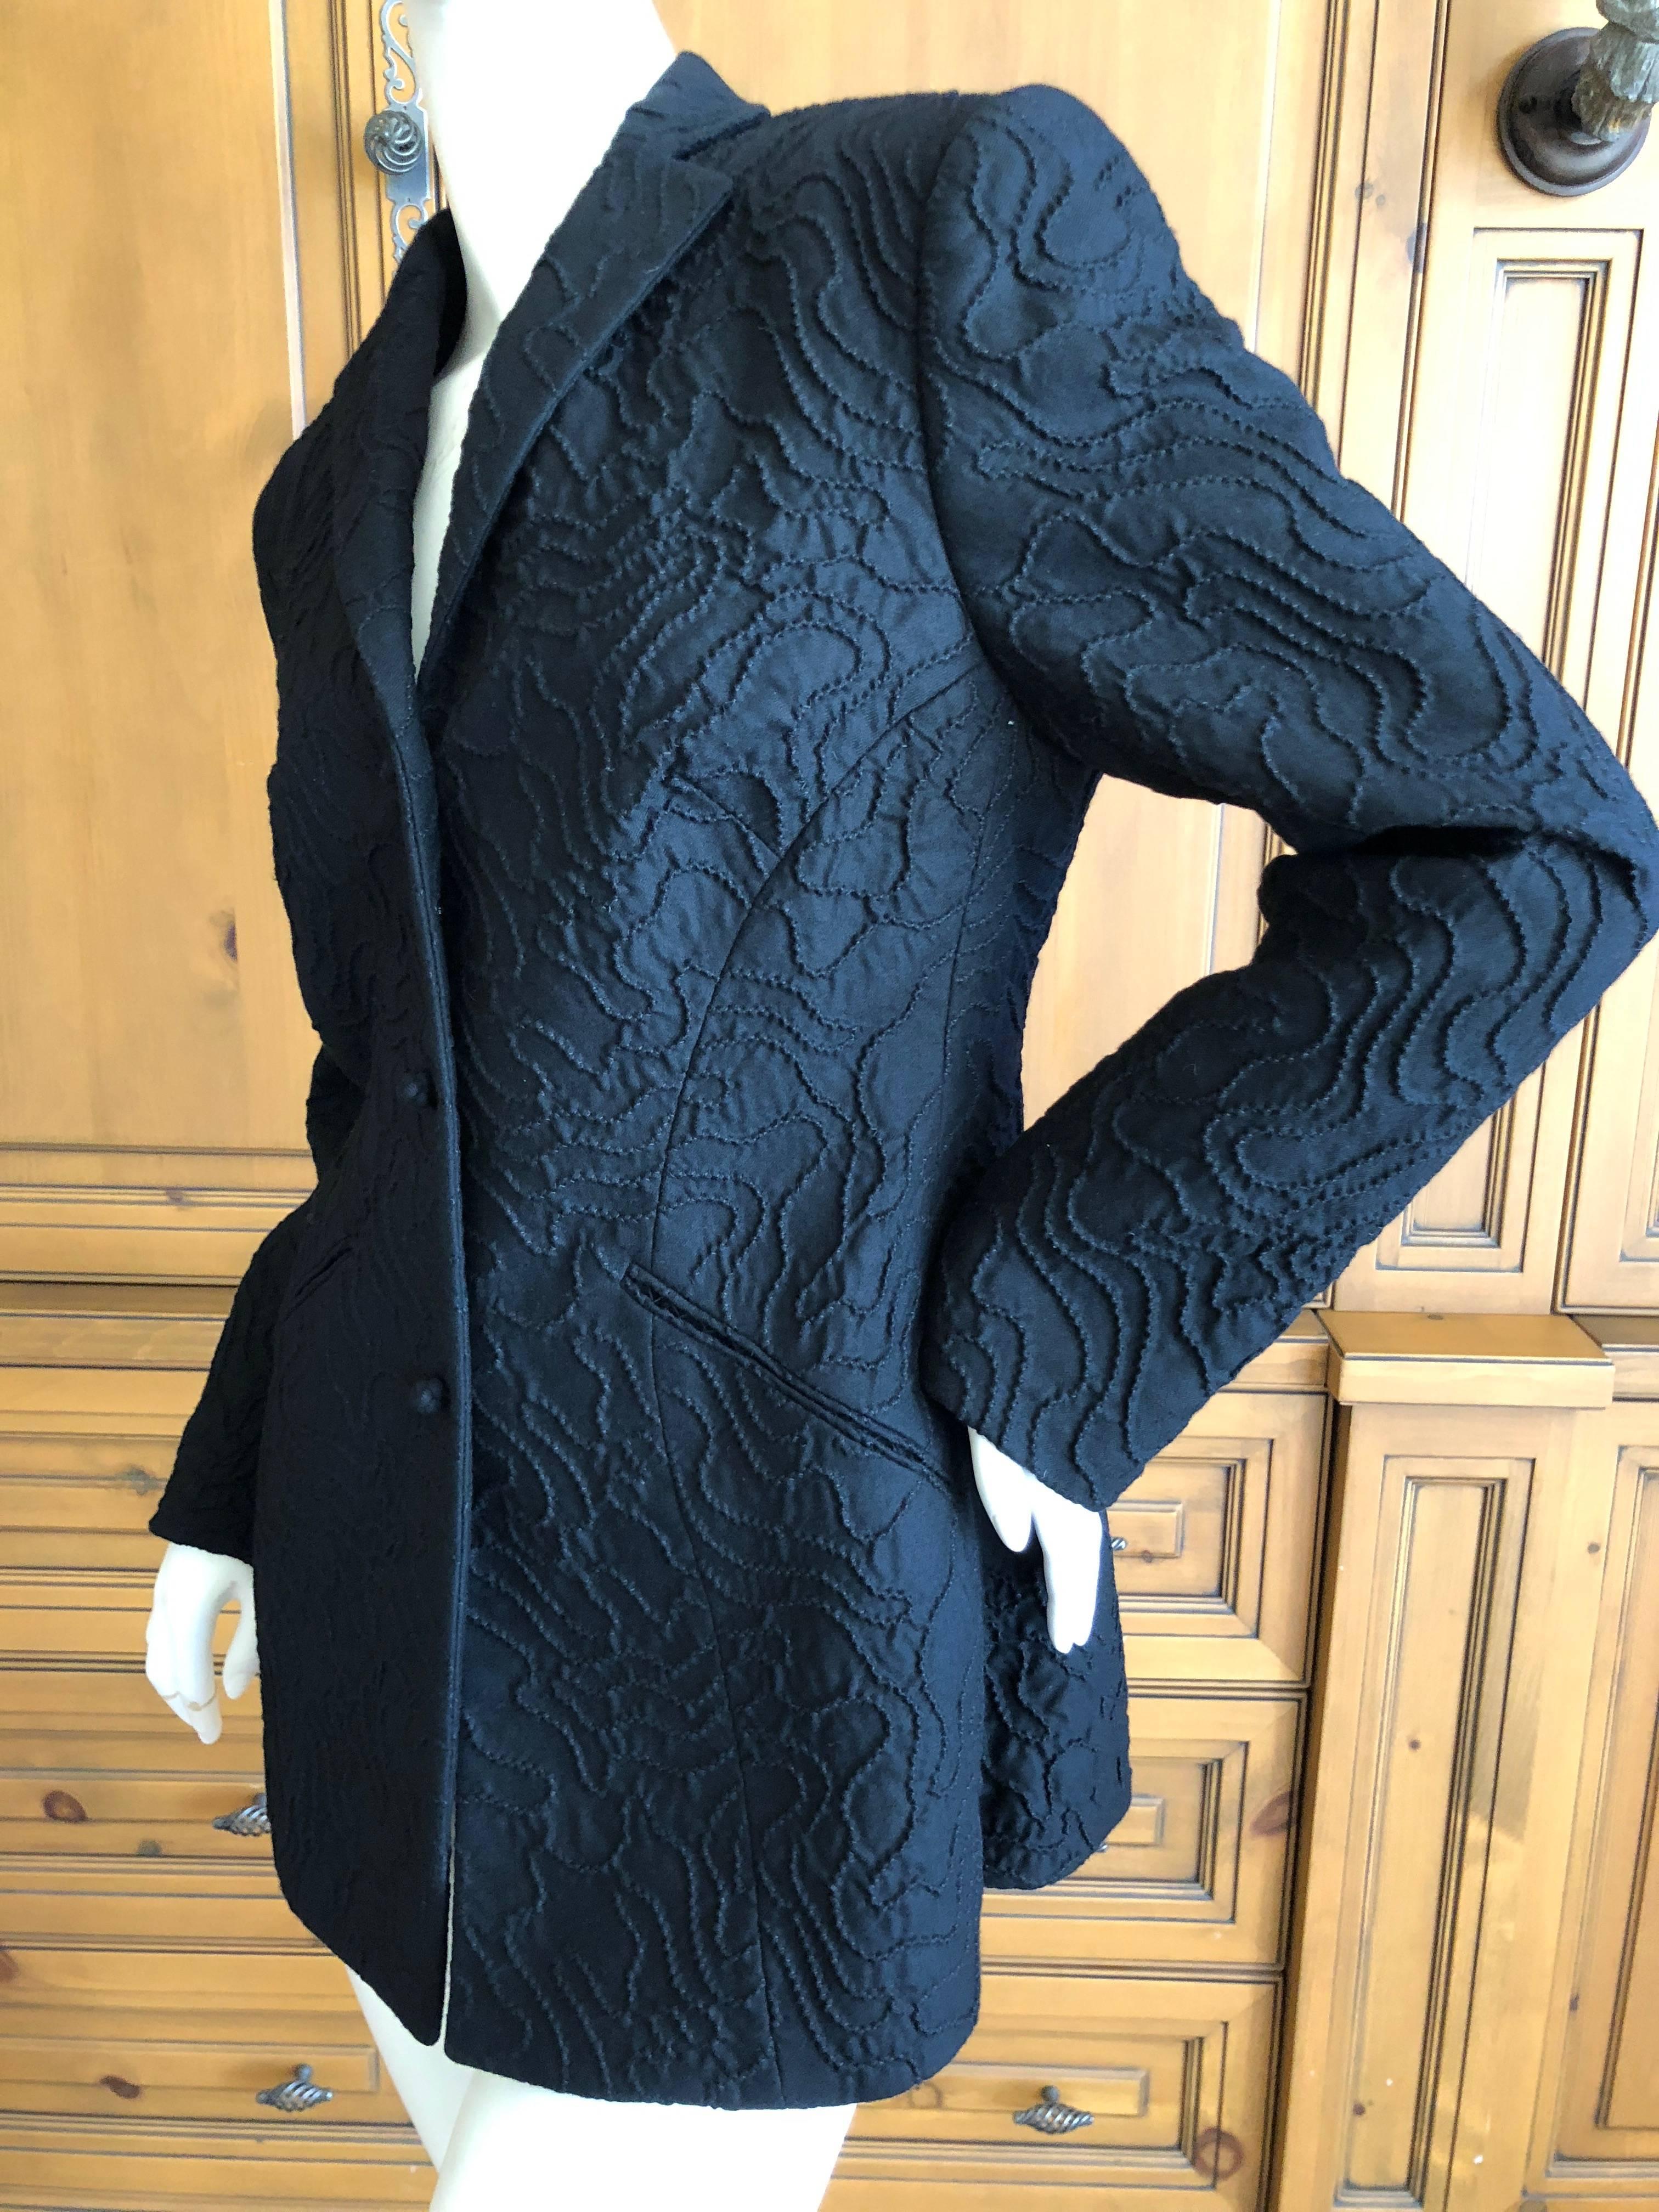 Chado Ralph Rucci Pure Cashmere Black Embellished Jacket Size 6 In Excellent Condition For Sale In Cloverdale, CA